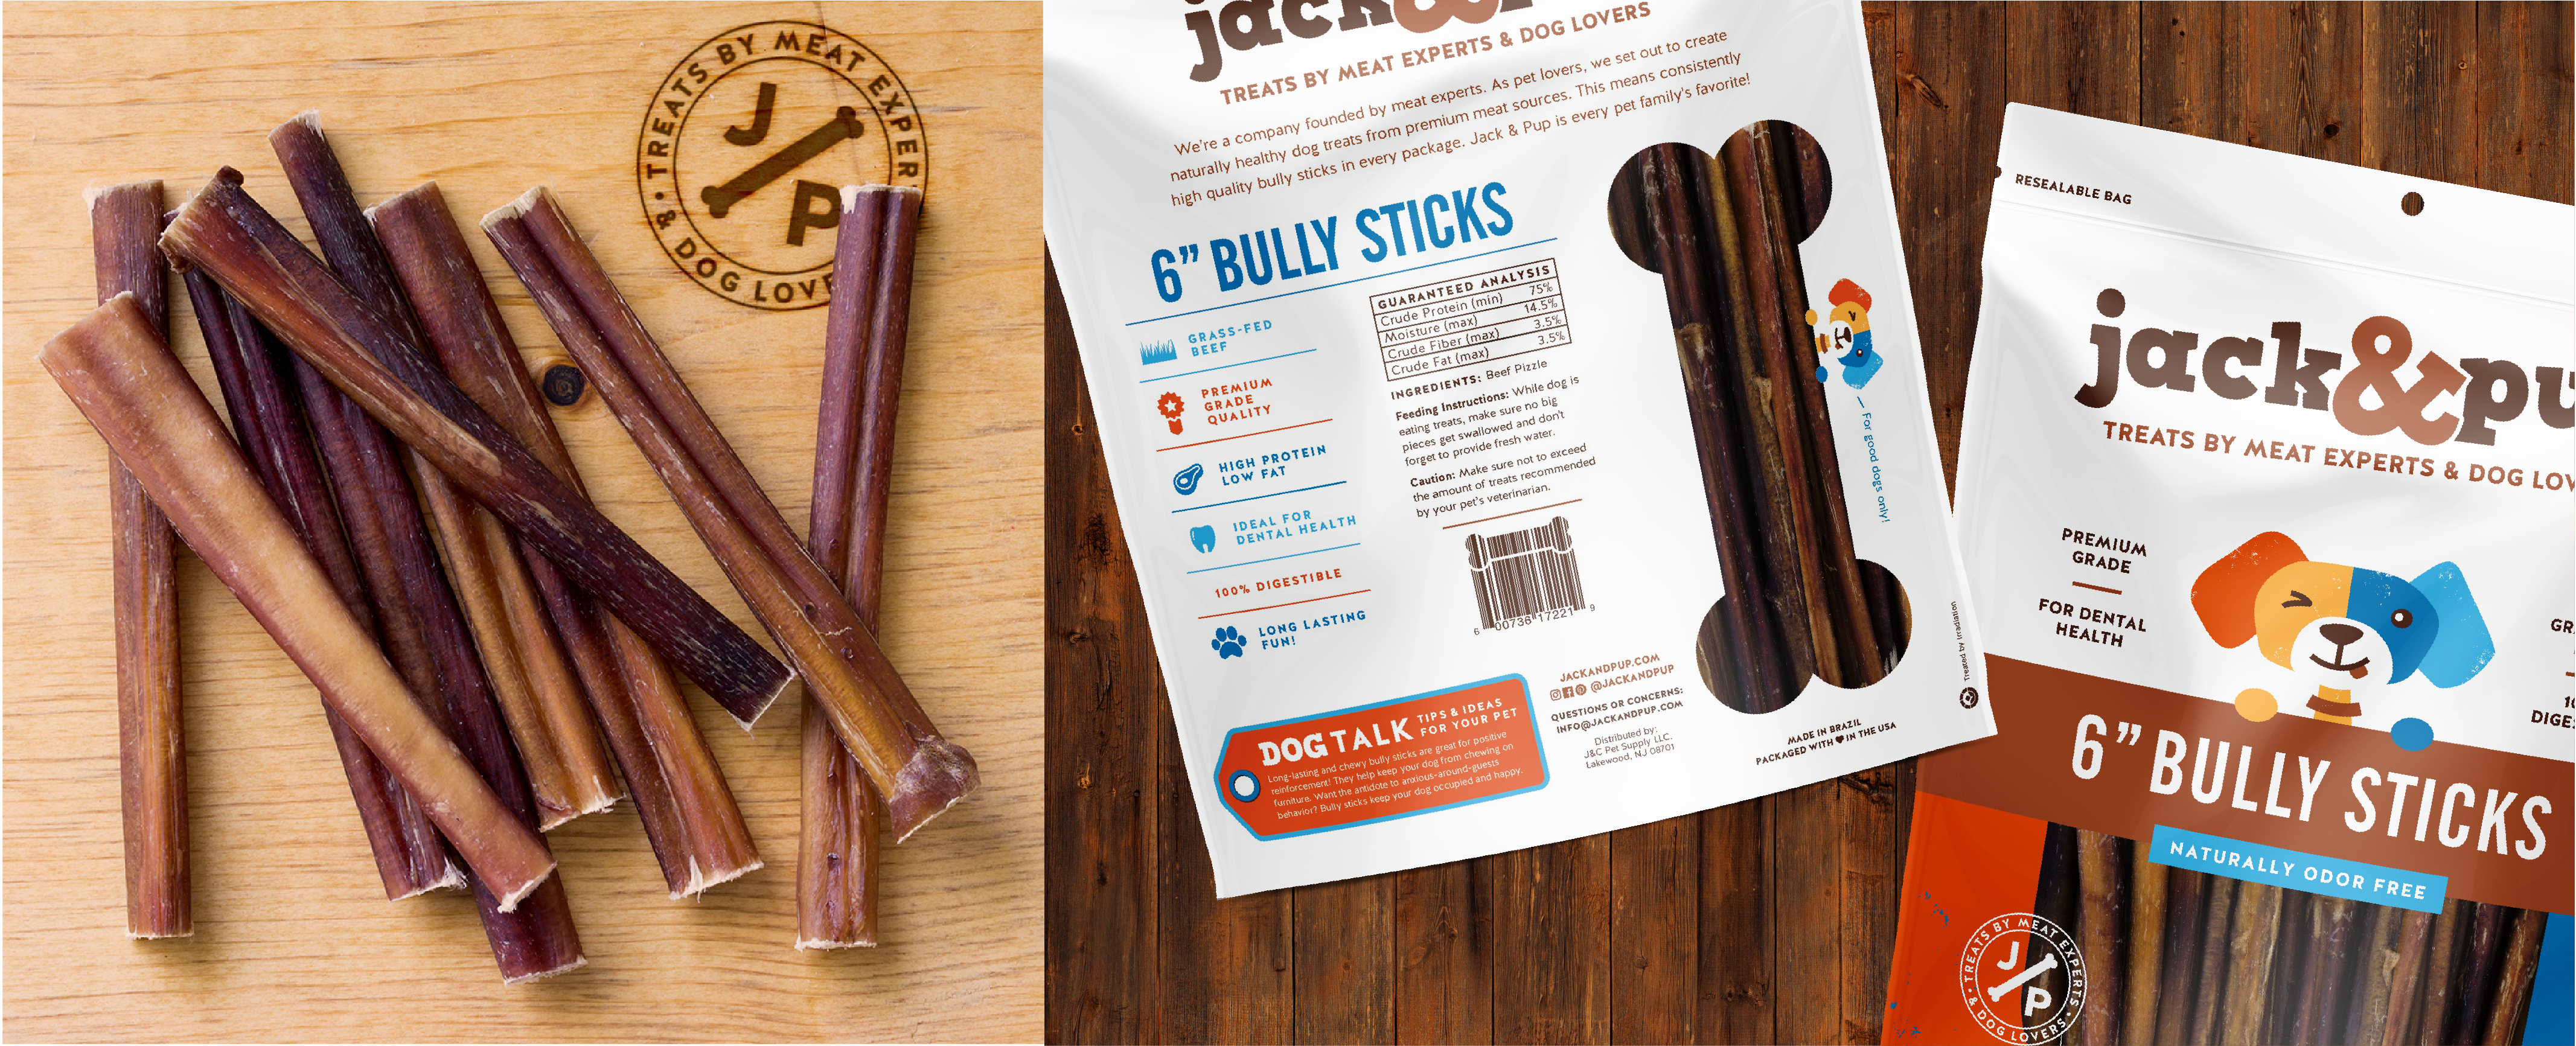 Jack and Pup Dog Treats Branding and Packaging